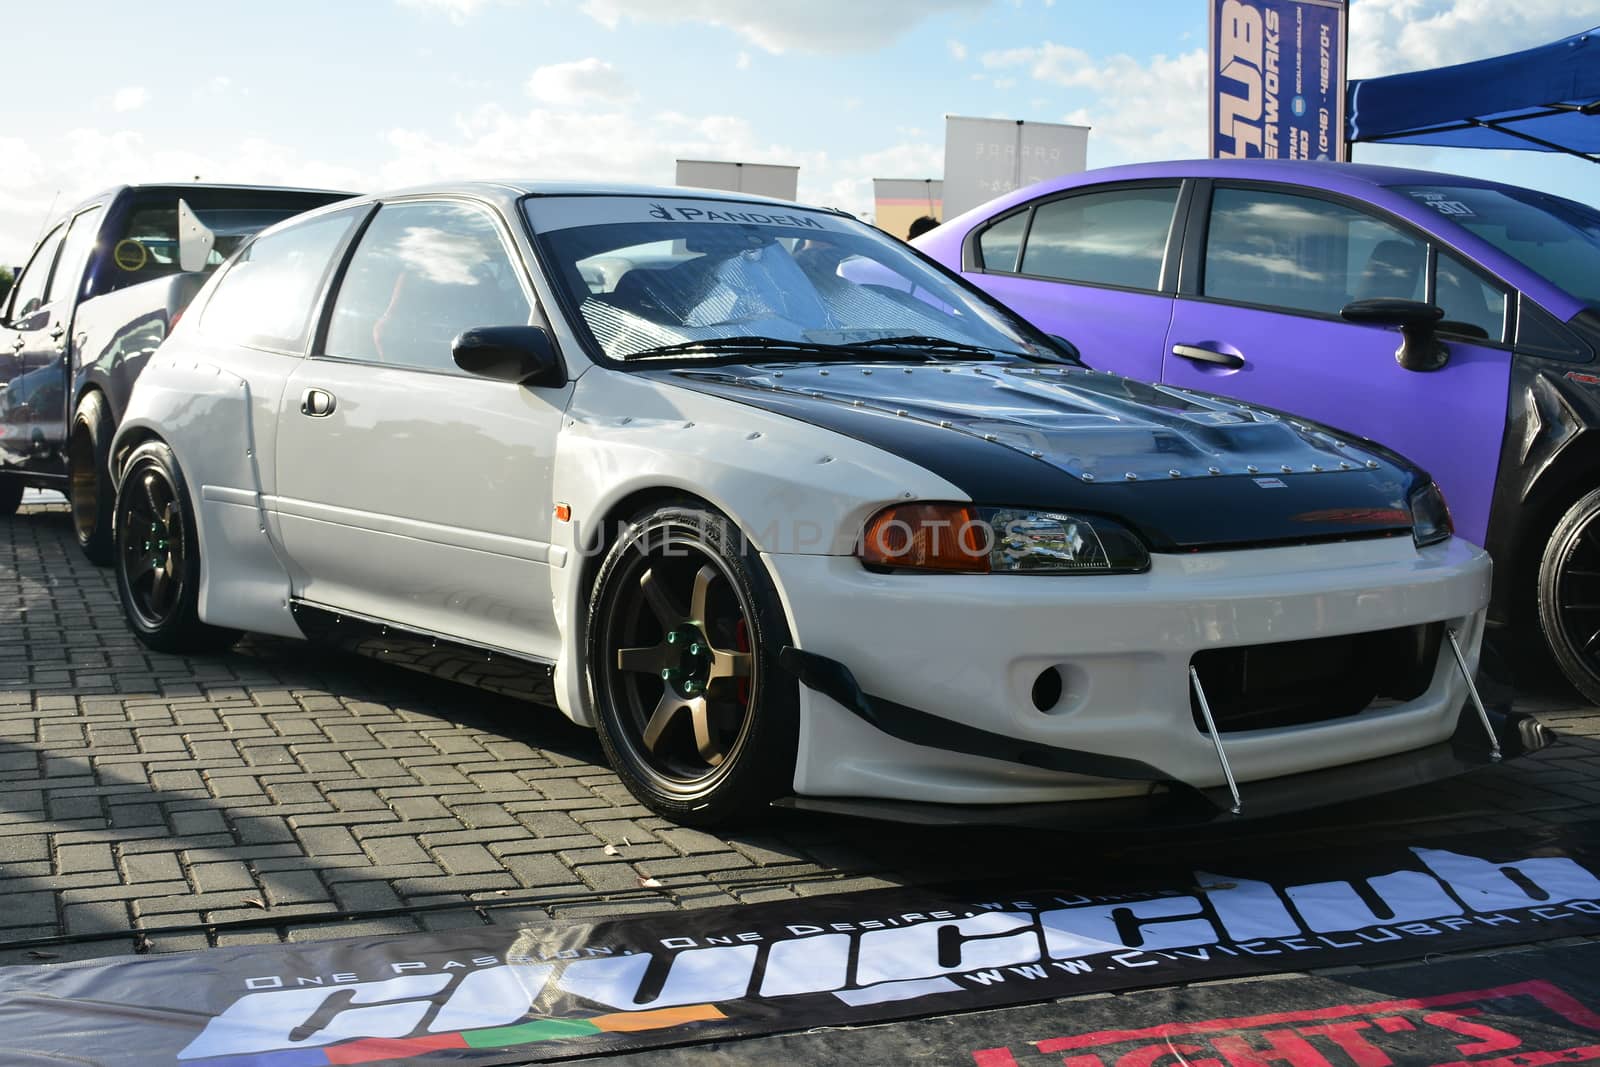 Honda civic at Bumper to Bumper car show in Pasay, Philippines by imwaltersy